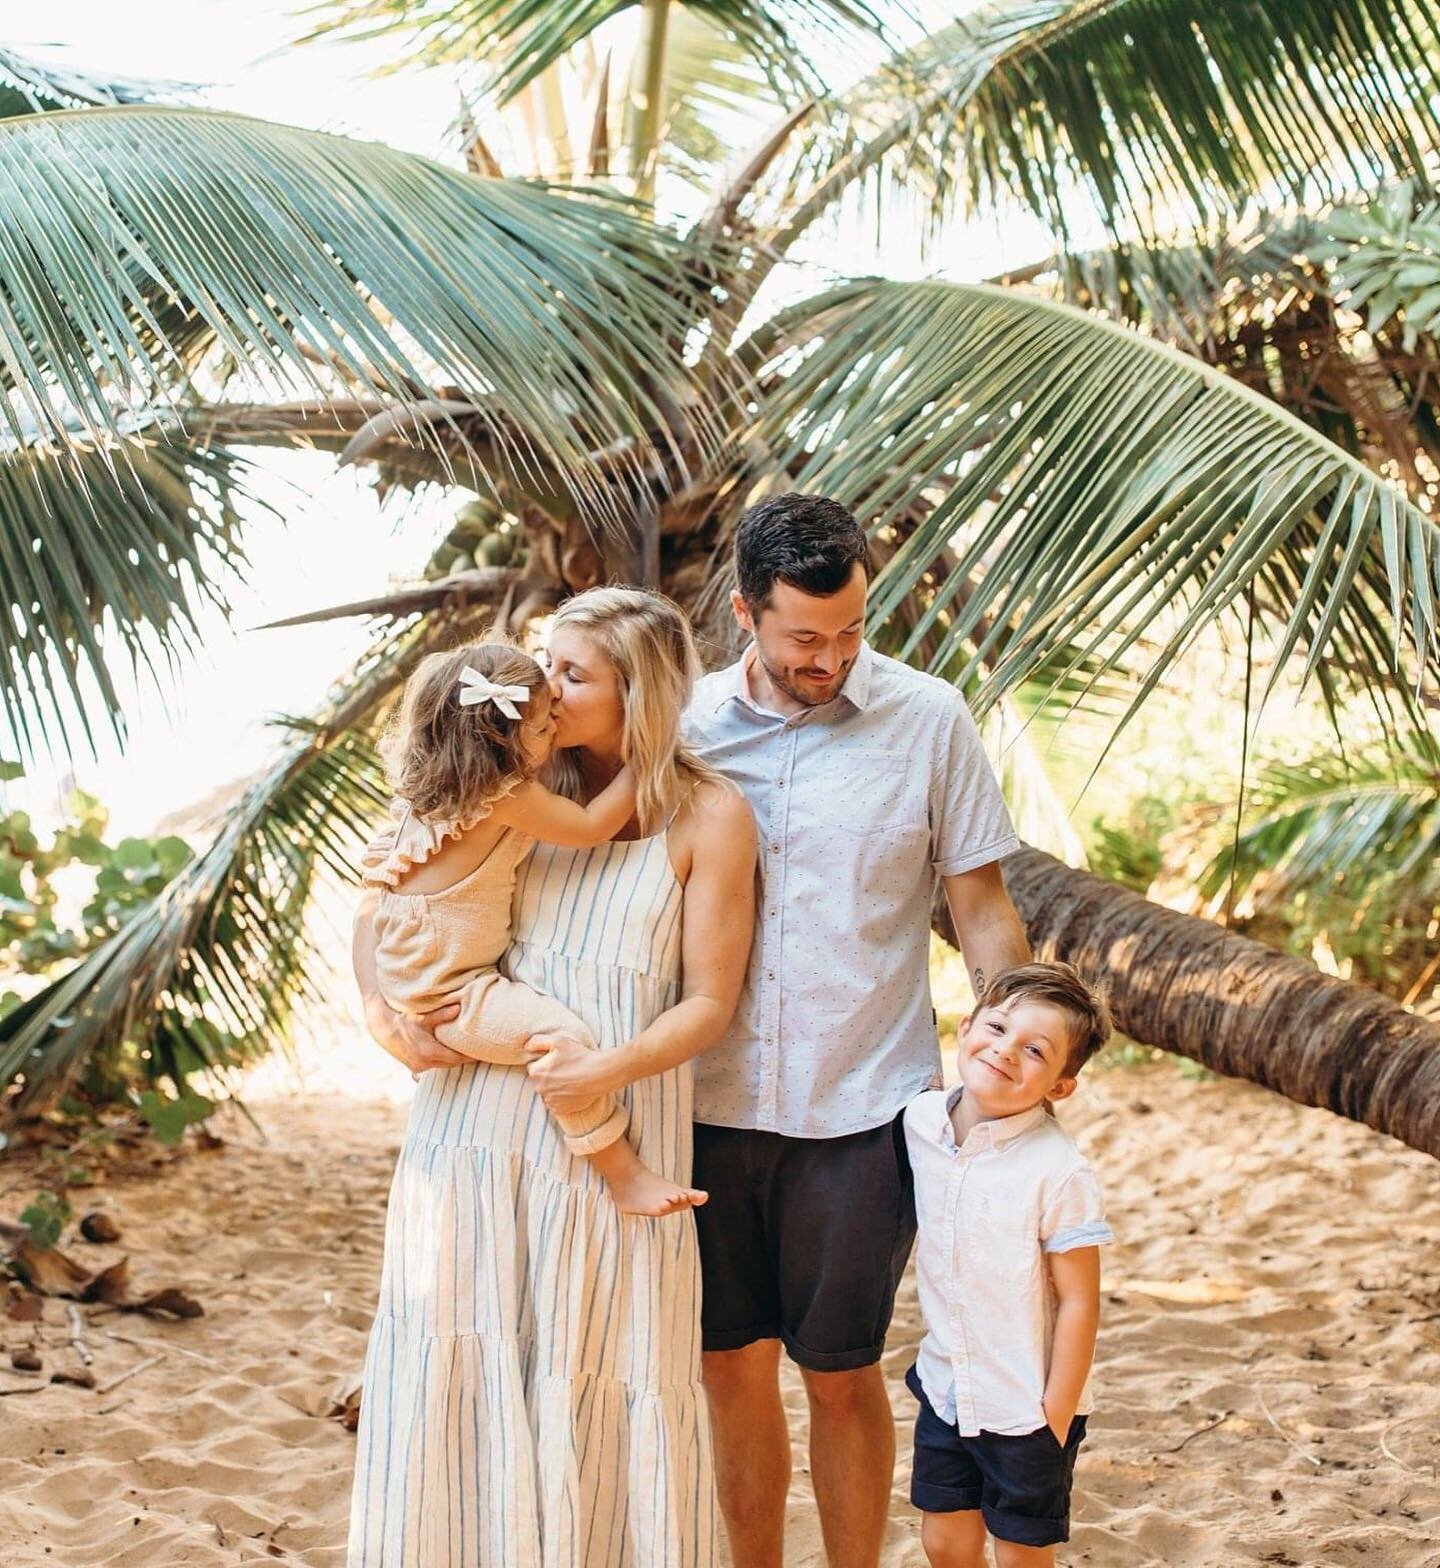 So much love in this sweet family 😍 
If you didn&rsquo;t see my stories earlier today I am still planning to move to Kauai and hoping it finally happens in March 🤞🏼 that&rsquo;s the plan at least! trying to plan anything since the pandemic started